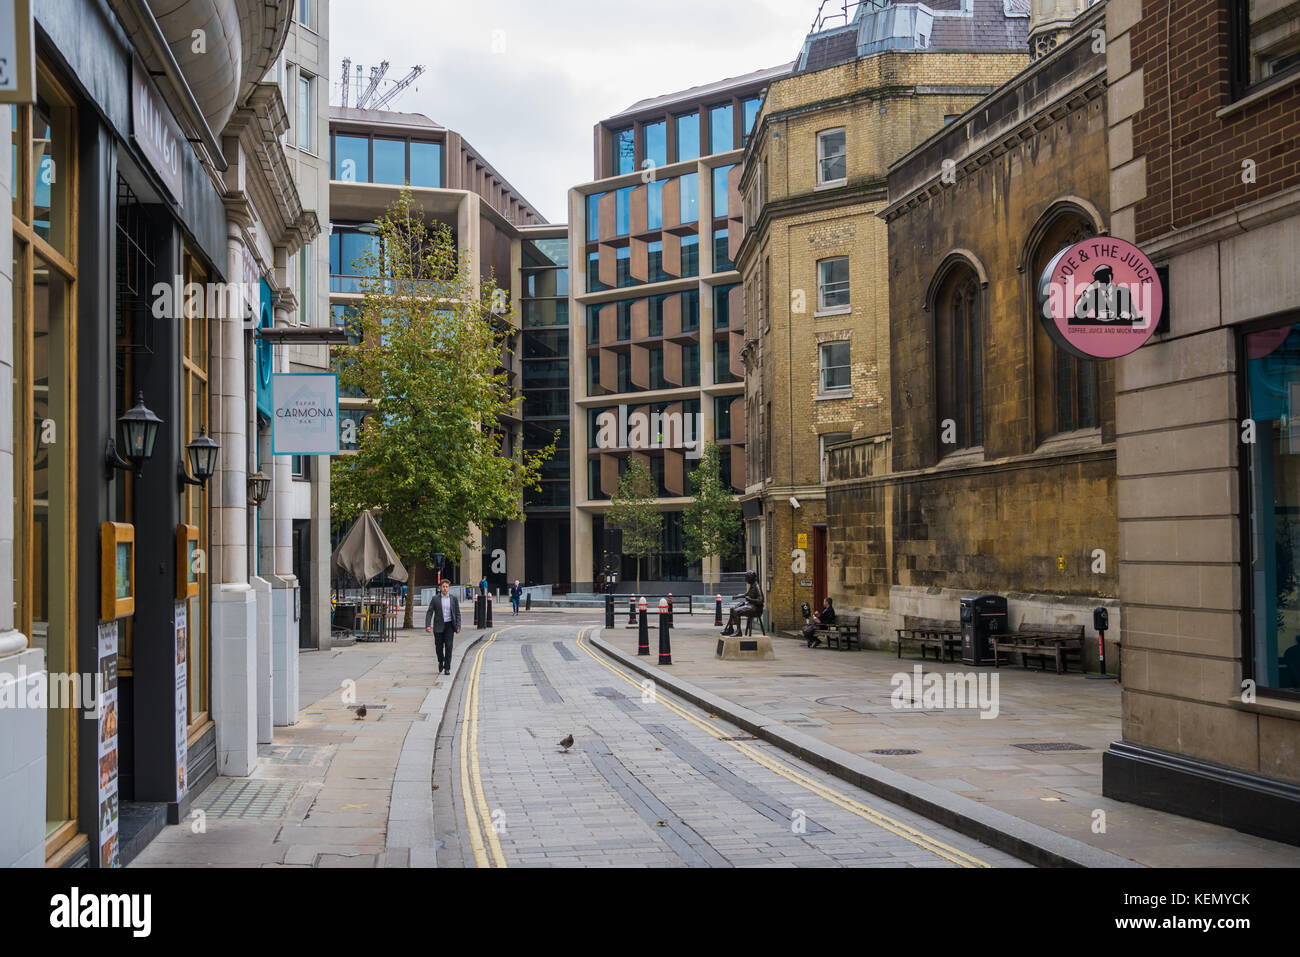 Bloomberg European headquarters in the City of London, as seen from Watling Street. Stock Photo